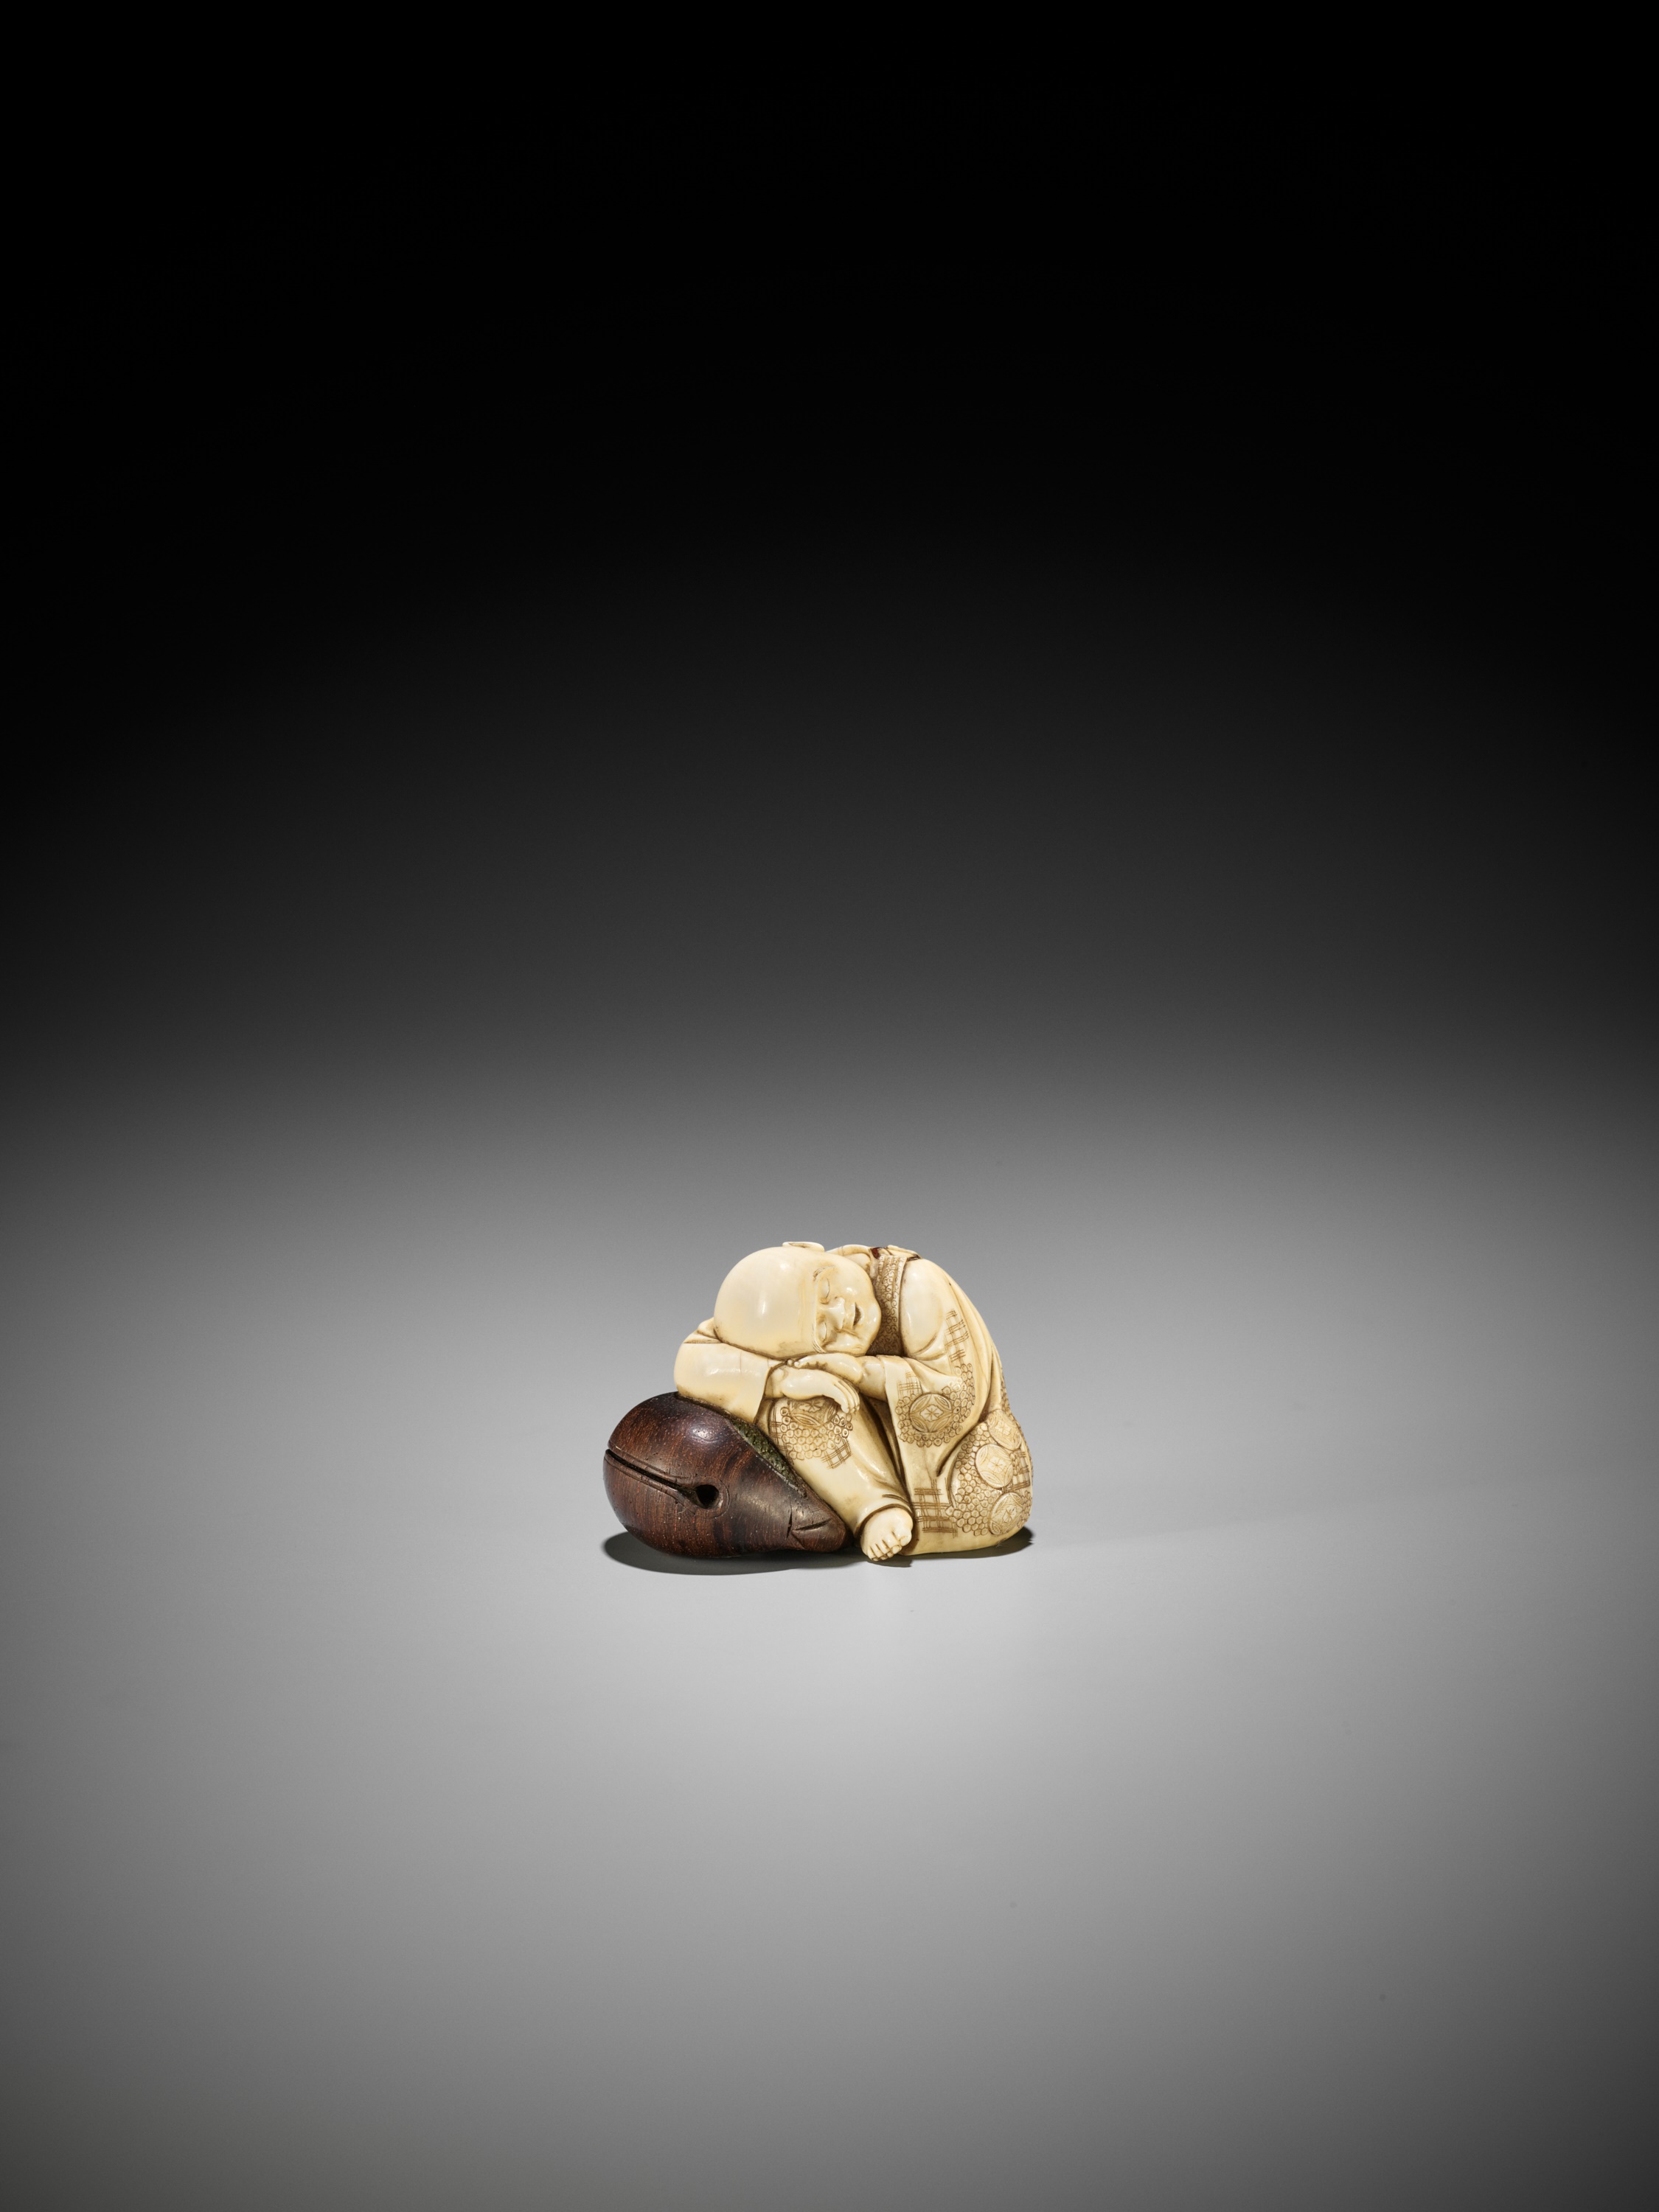 GYOKUSUI: A FINE TOKYO SCHOOL IVORY AND WOOD NETSUKE OF A PRIEST RESTING ON A MOKUGYO - Image 7 of 11